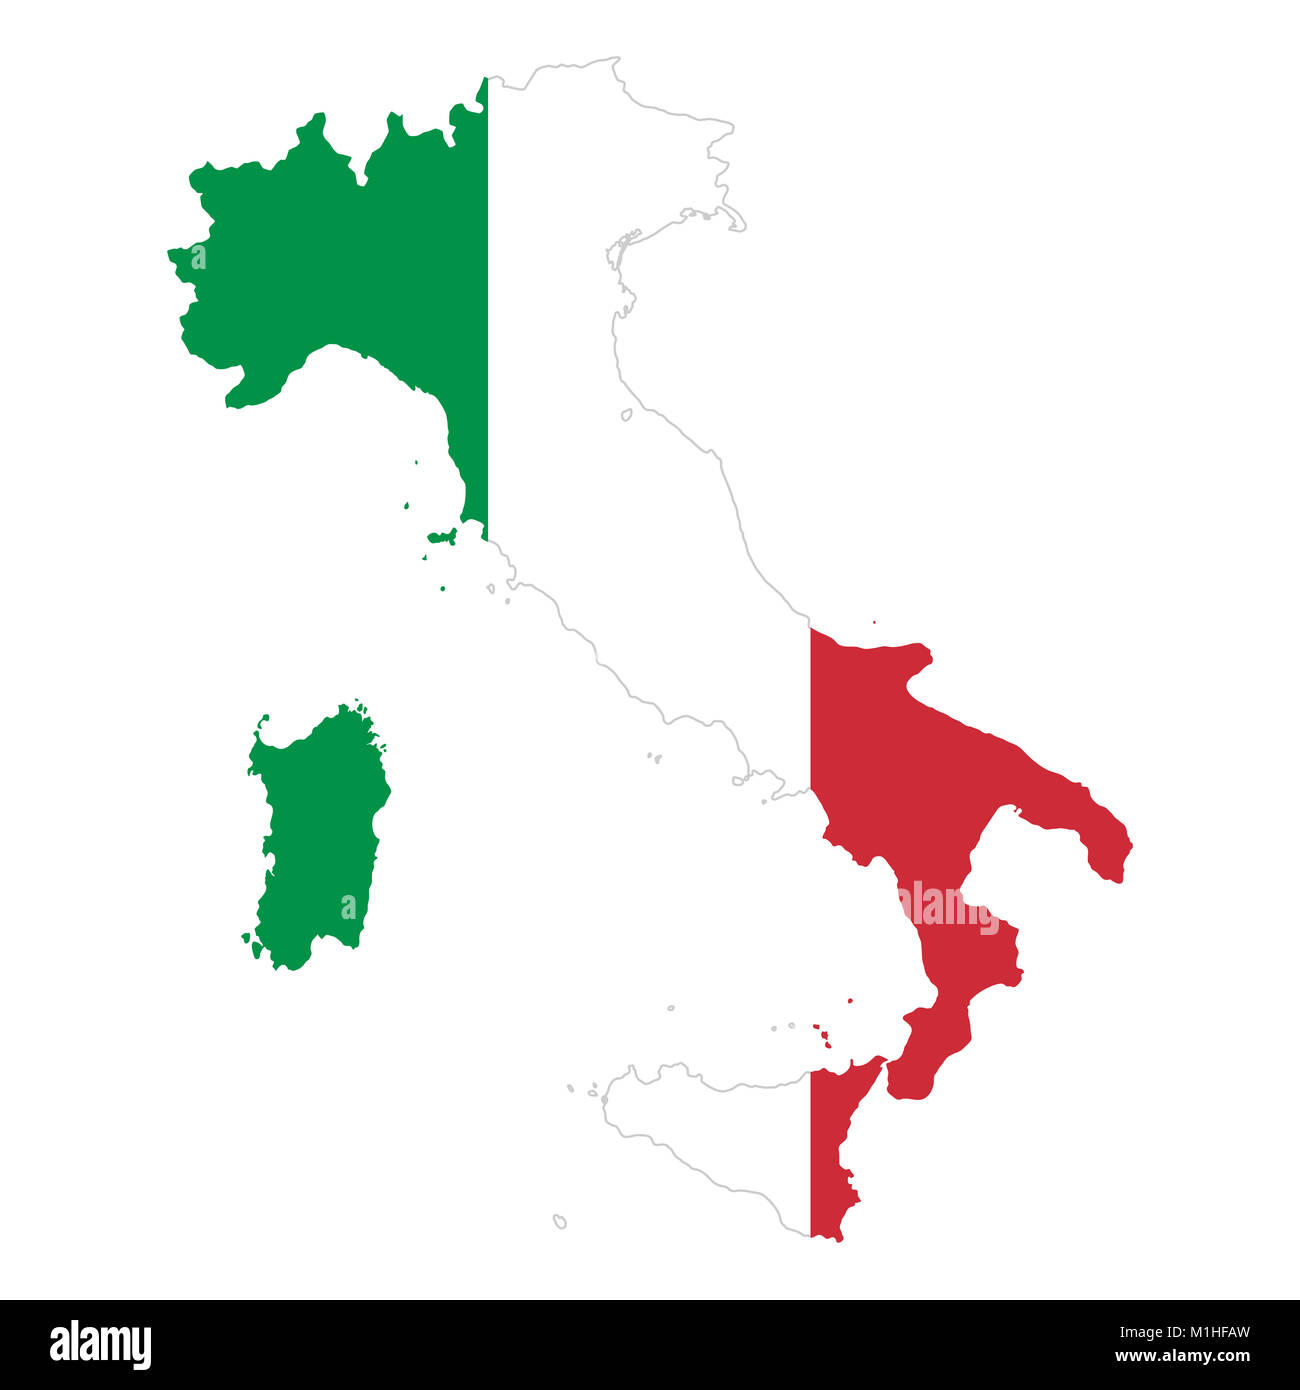 Italian Republic flag in country silhouette. Landmass and borders of Italy as outline, within the banner of the nation in colors green, white and red. Stock Photo